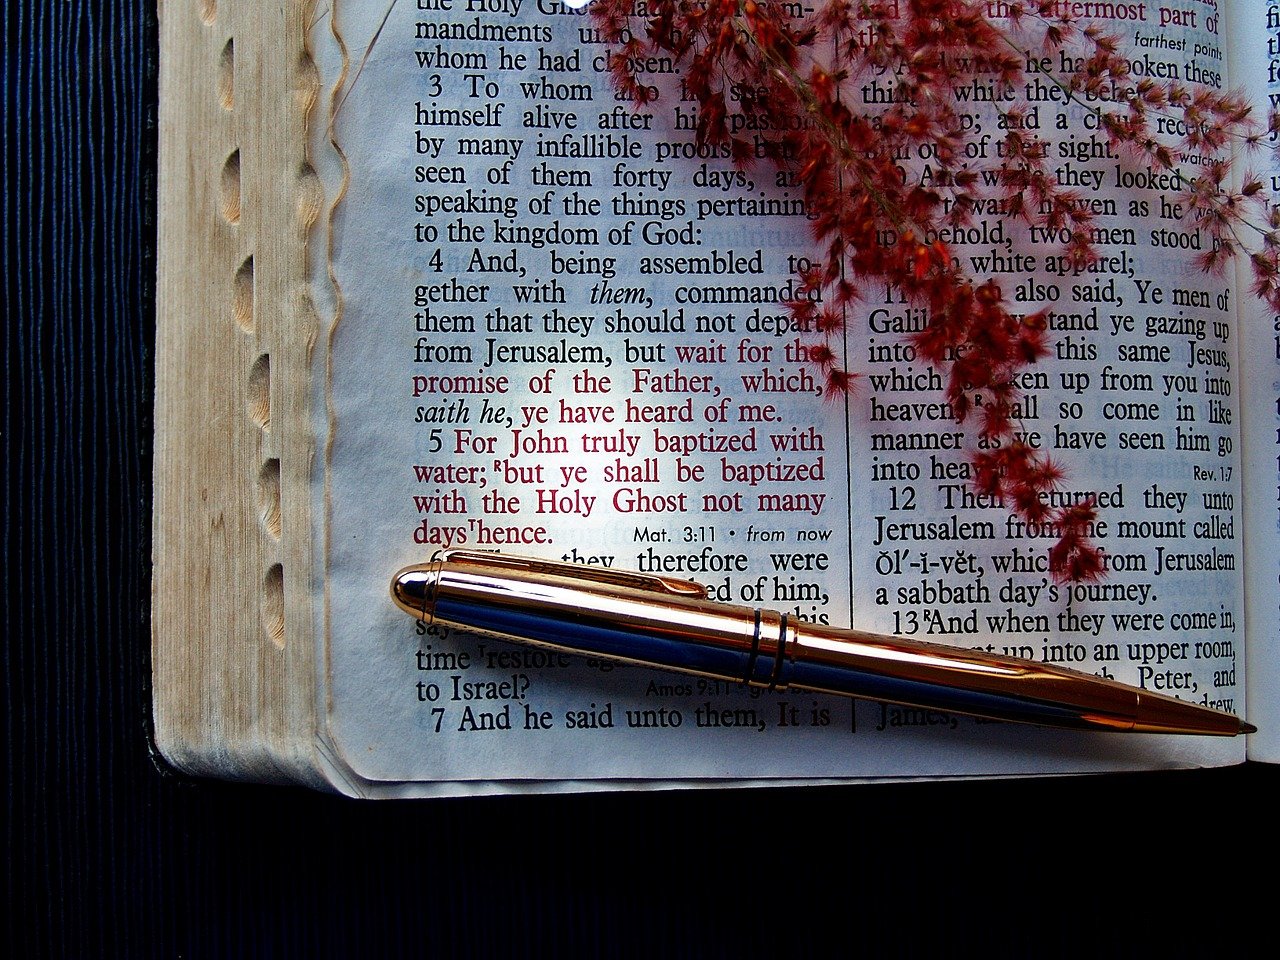 Open Bible to a verse about the Holy Spirit of God, with a pen on the Bible and branch of a red plant